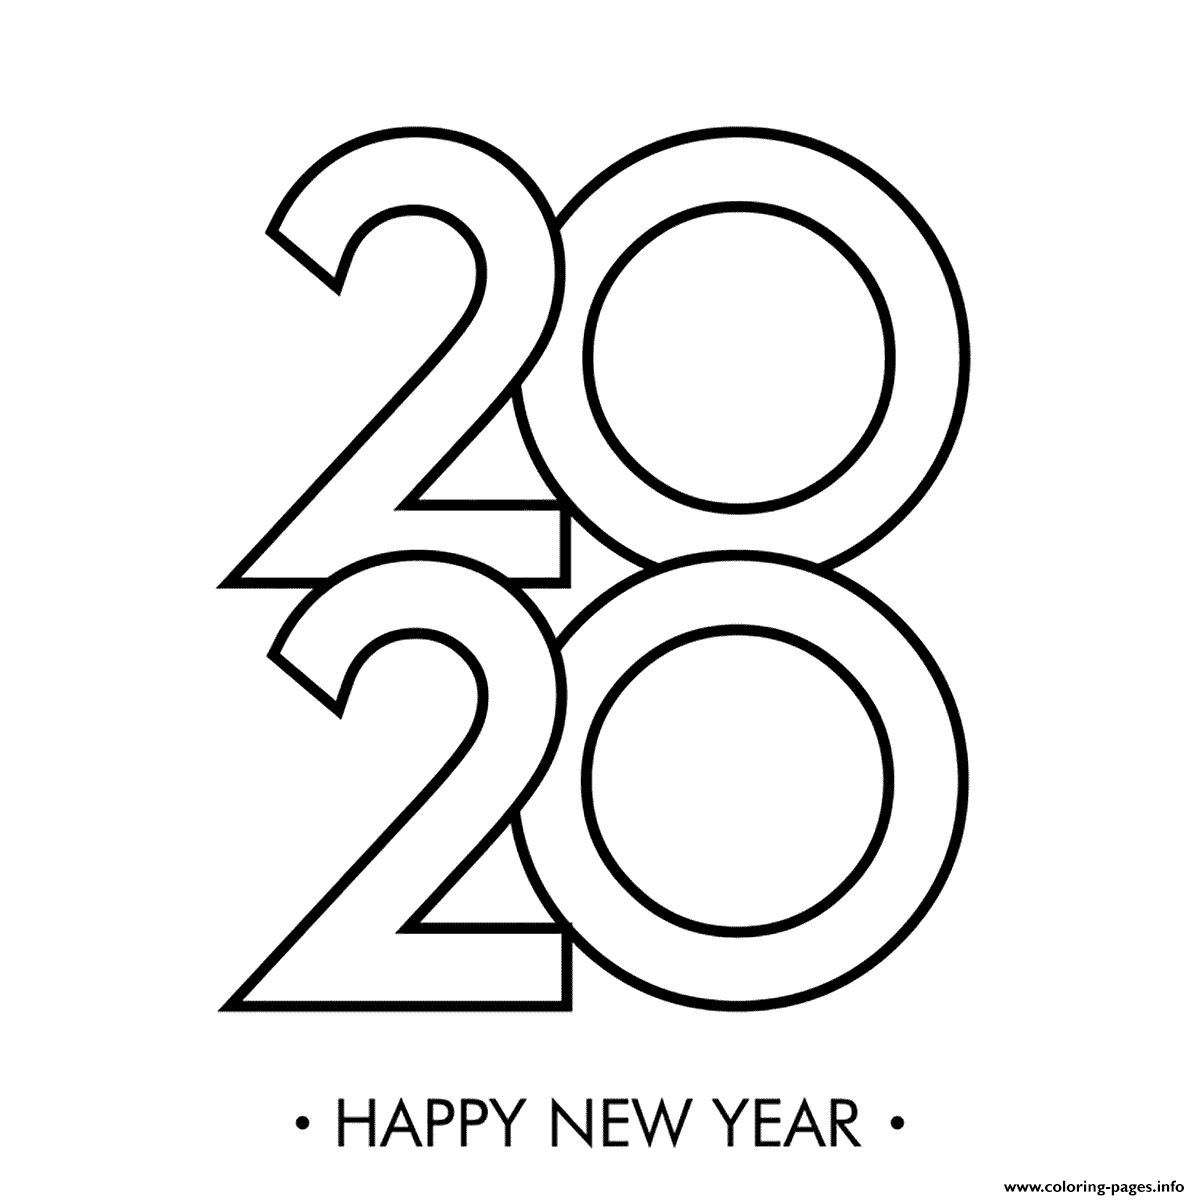 Easy 2020 Black And White coloring